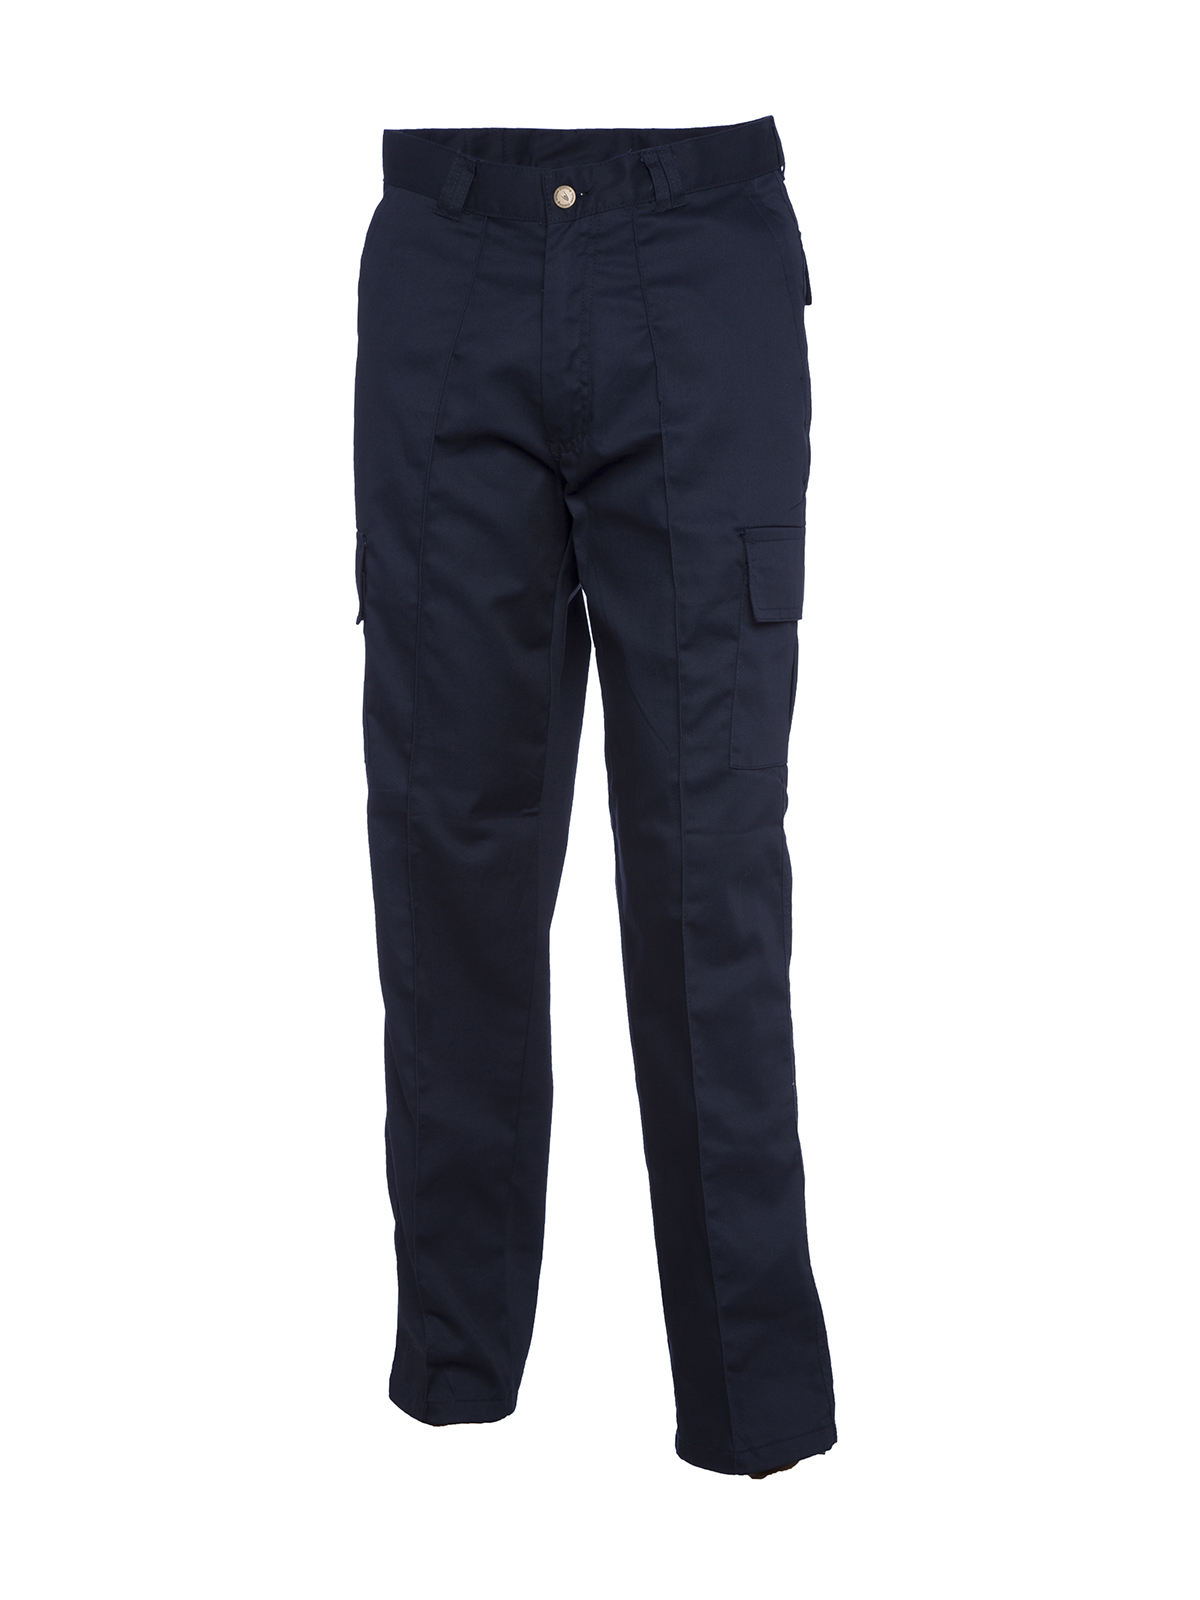 Cargo Trousers, Navy Blue - 48R